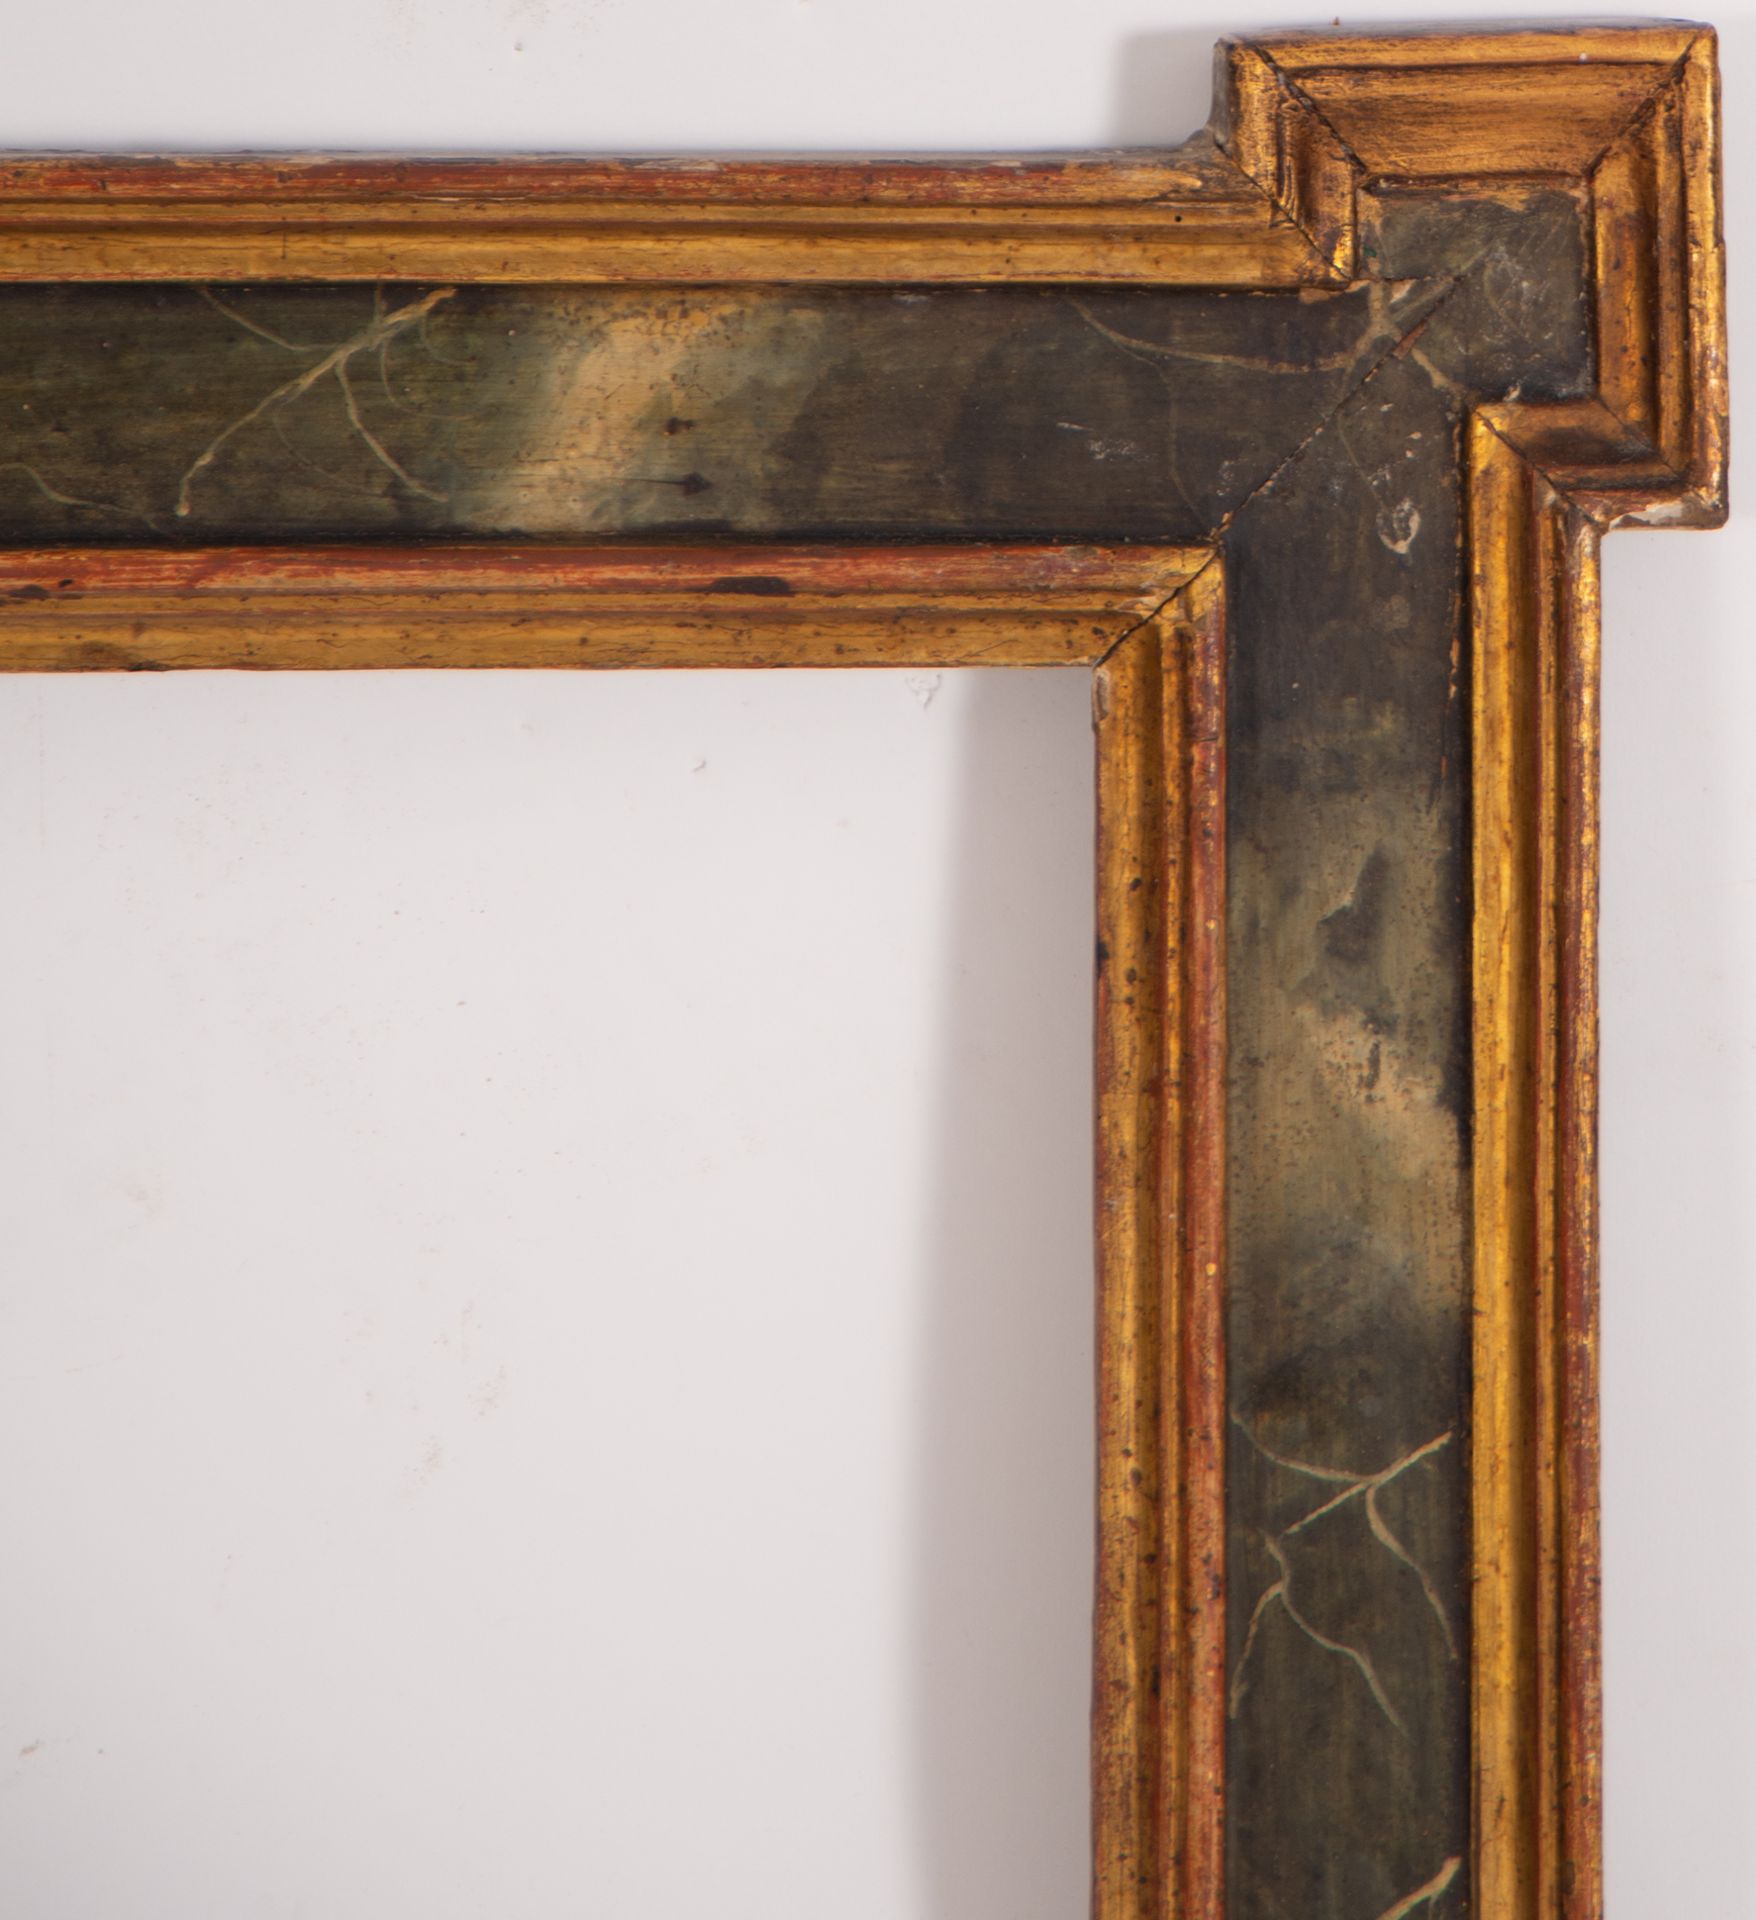 Rare Gilded and Marbled Frame, Italy, 18th century - Image 4 of 5